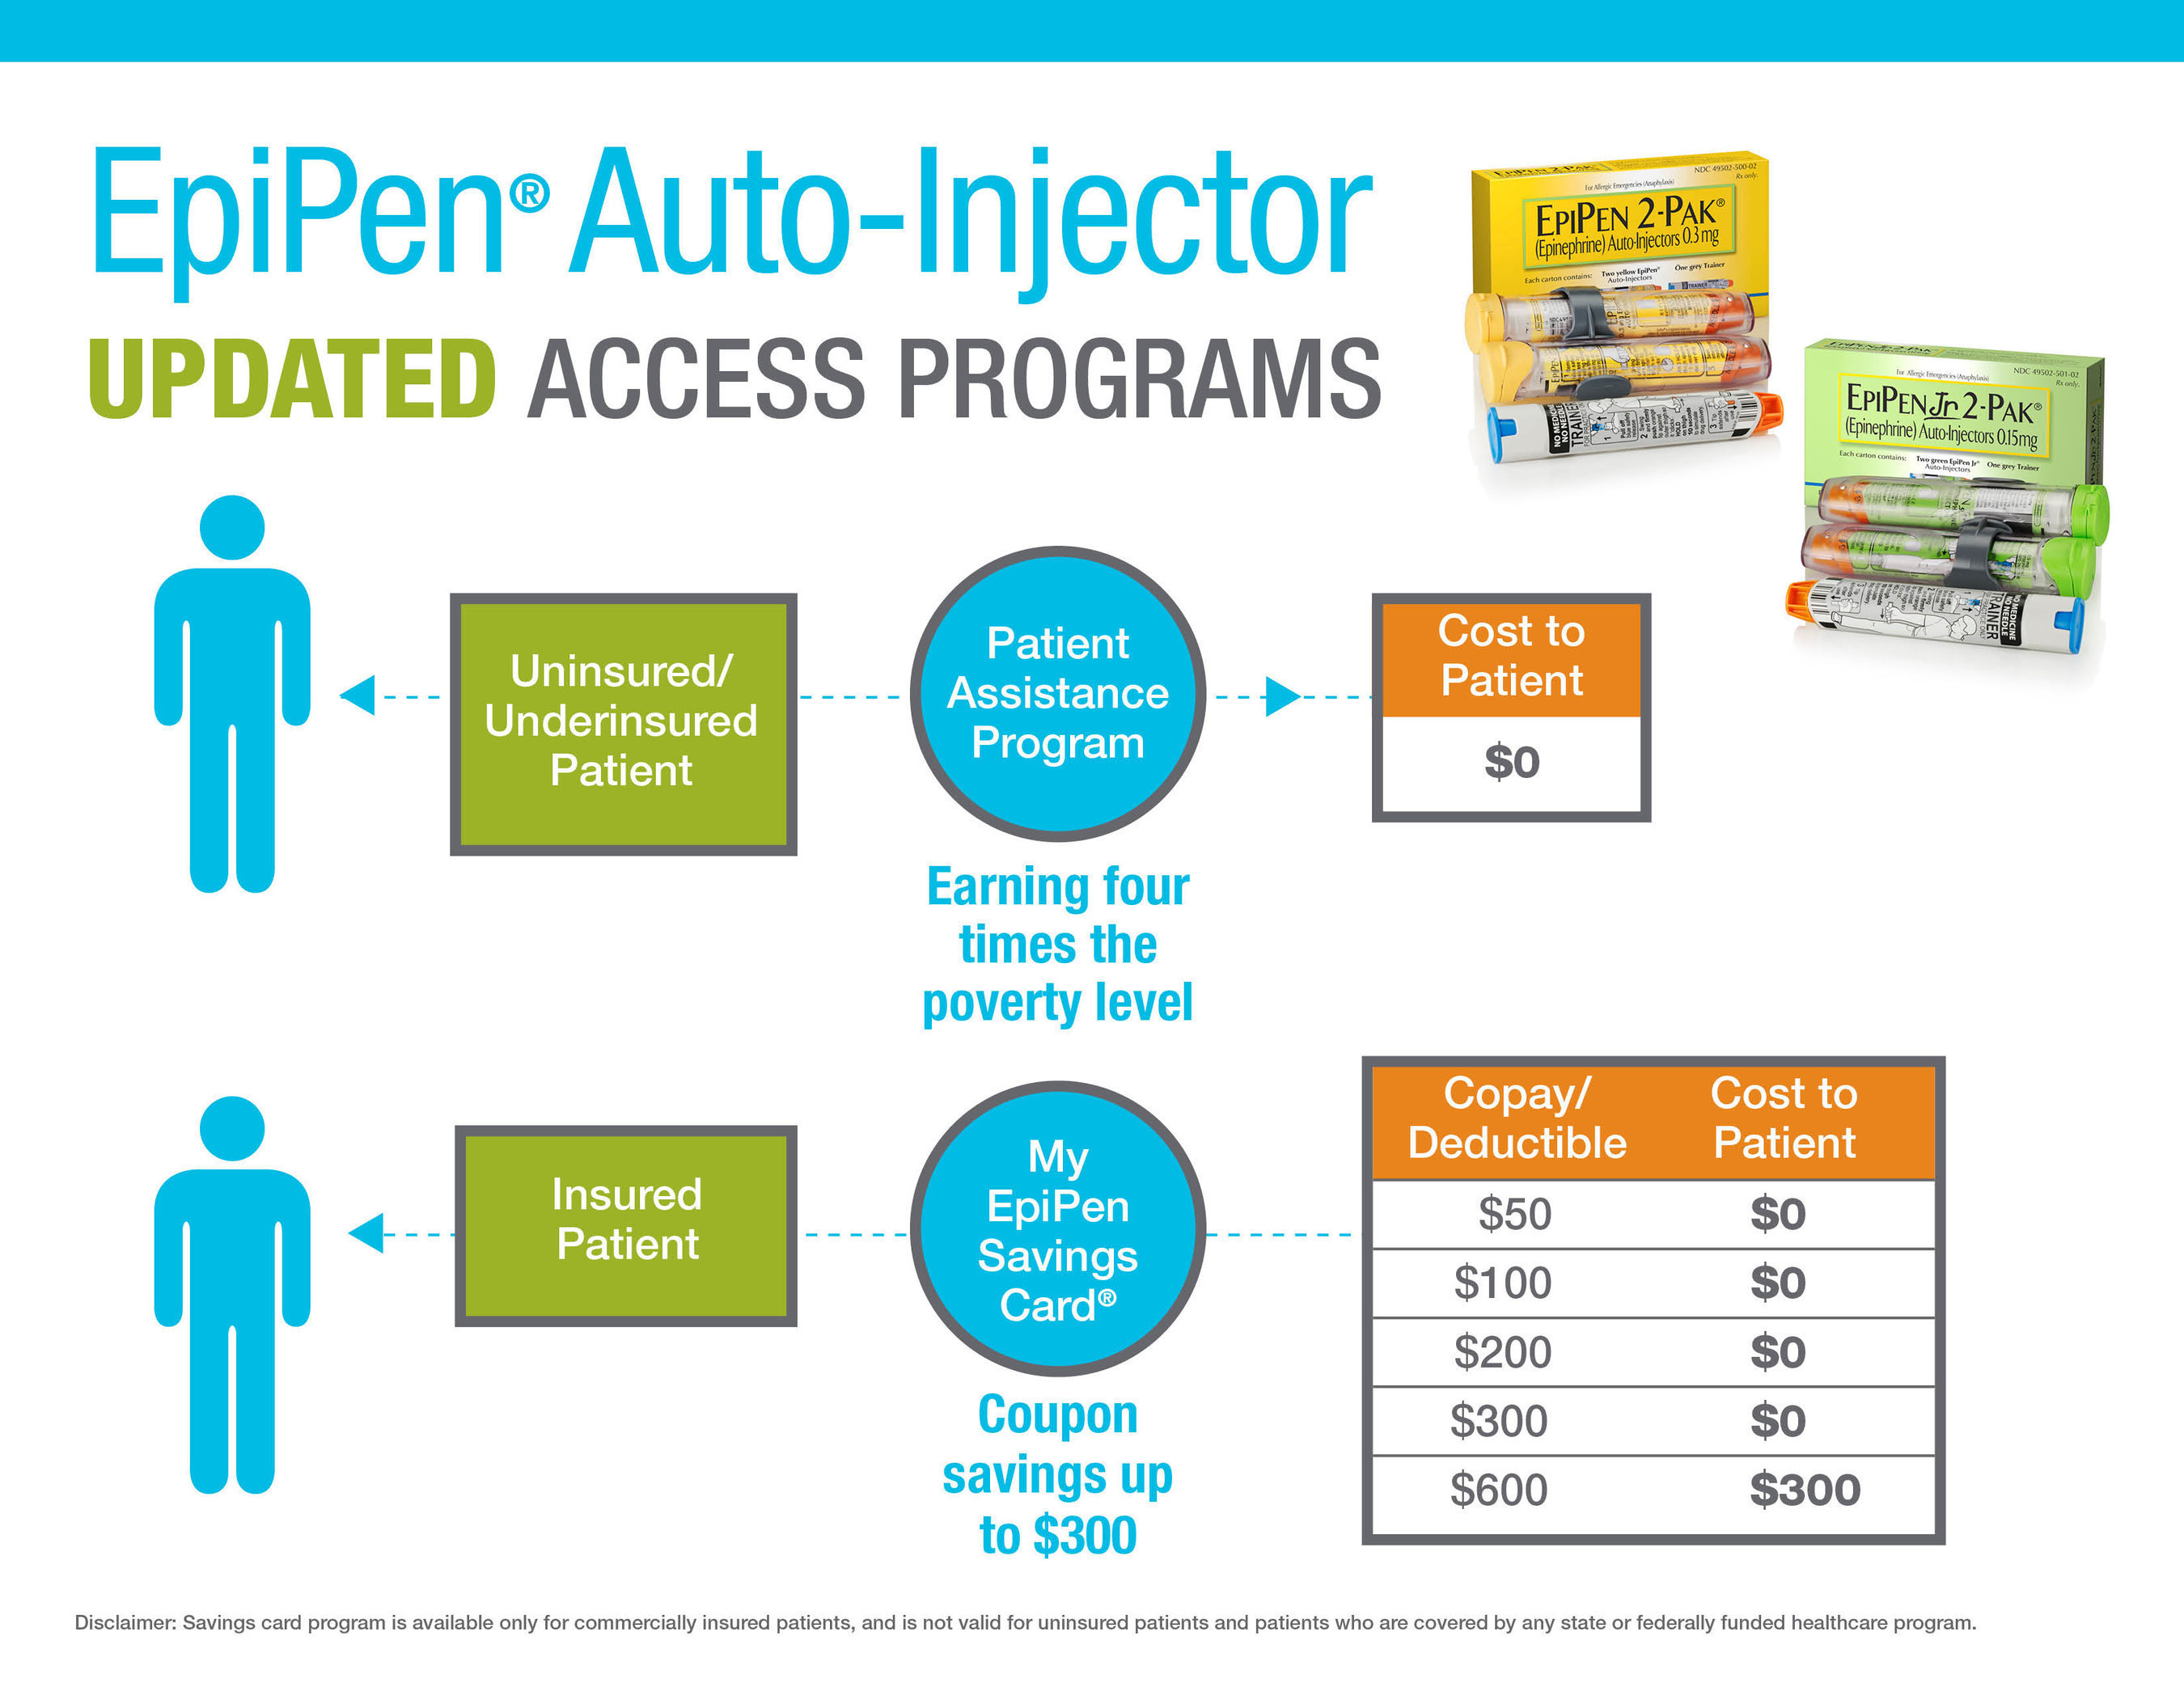 EpiPen(r) (epinephrine injection, USP) Auto-Injector Updated Access Programs